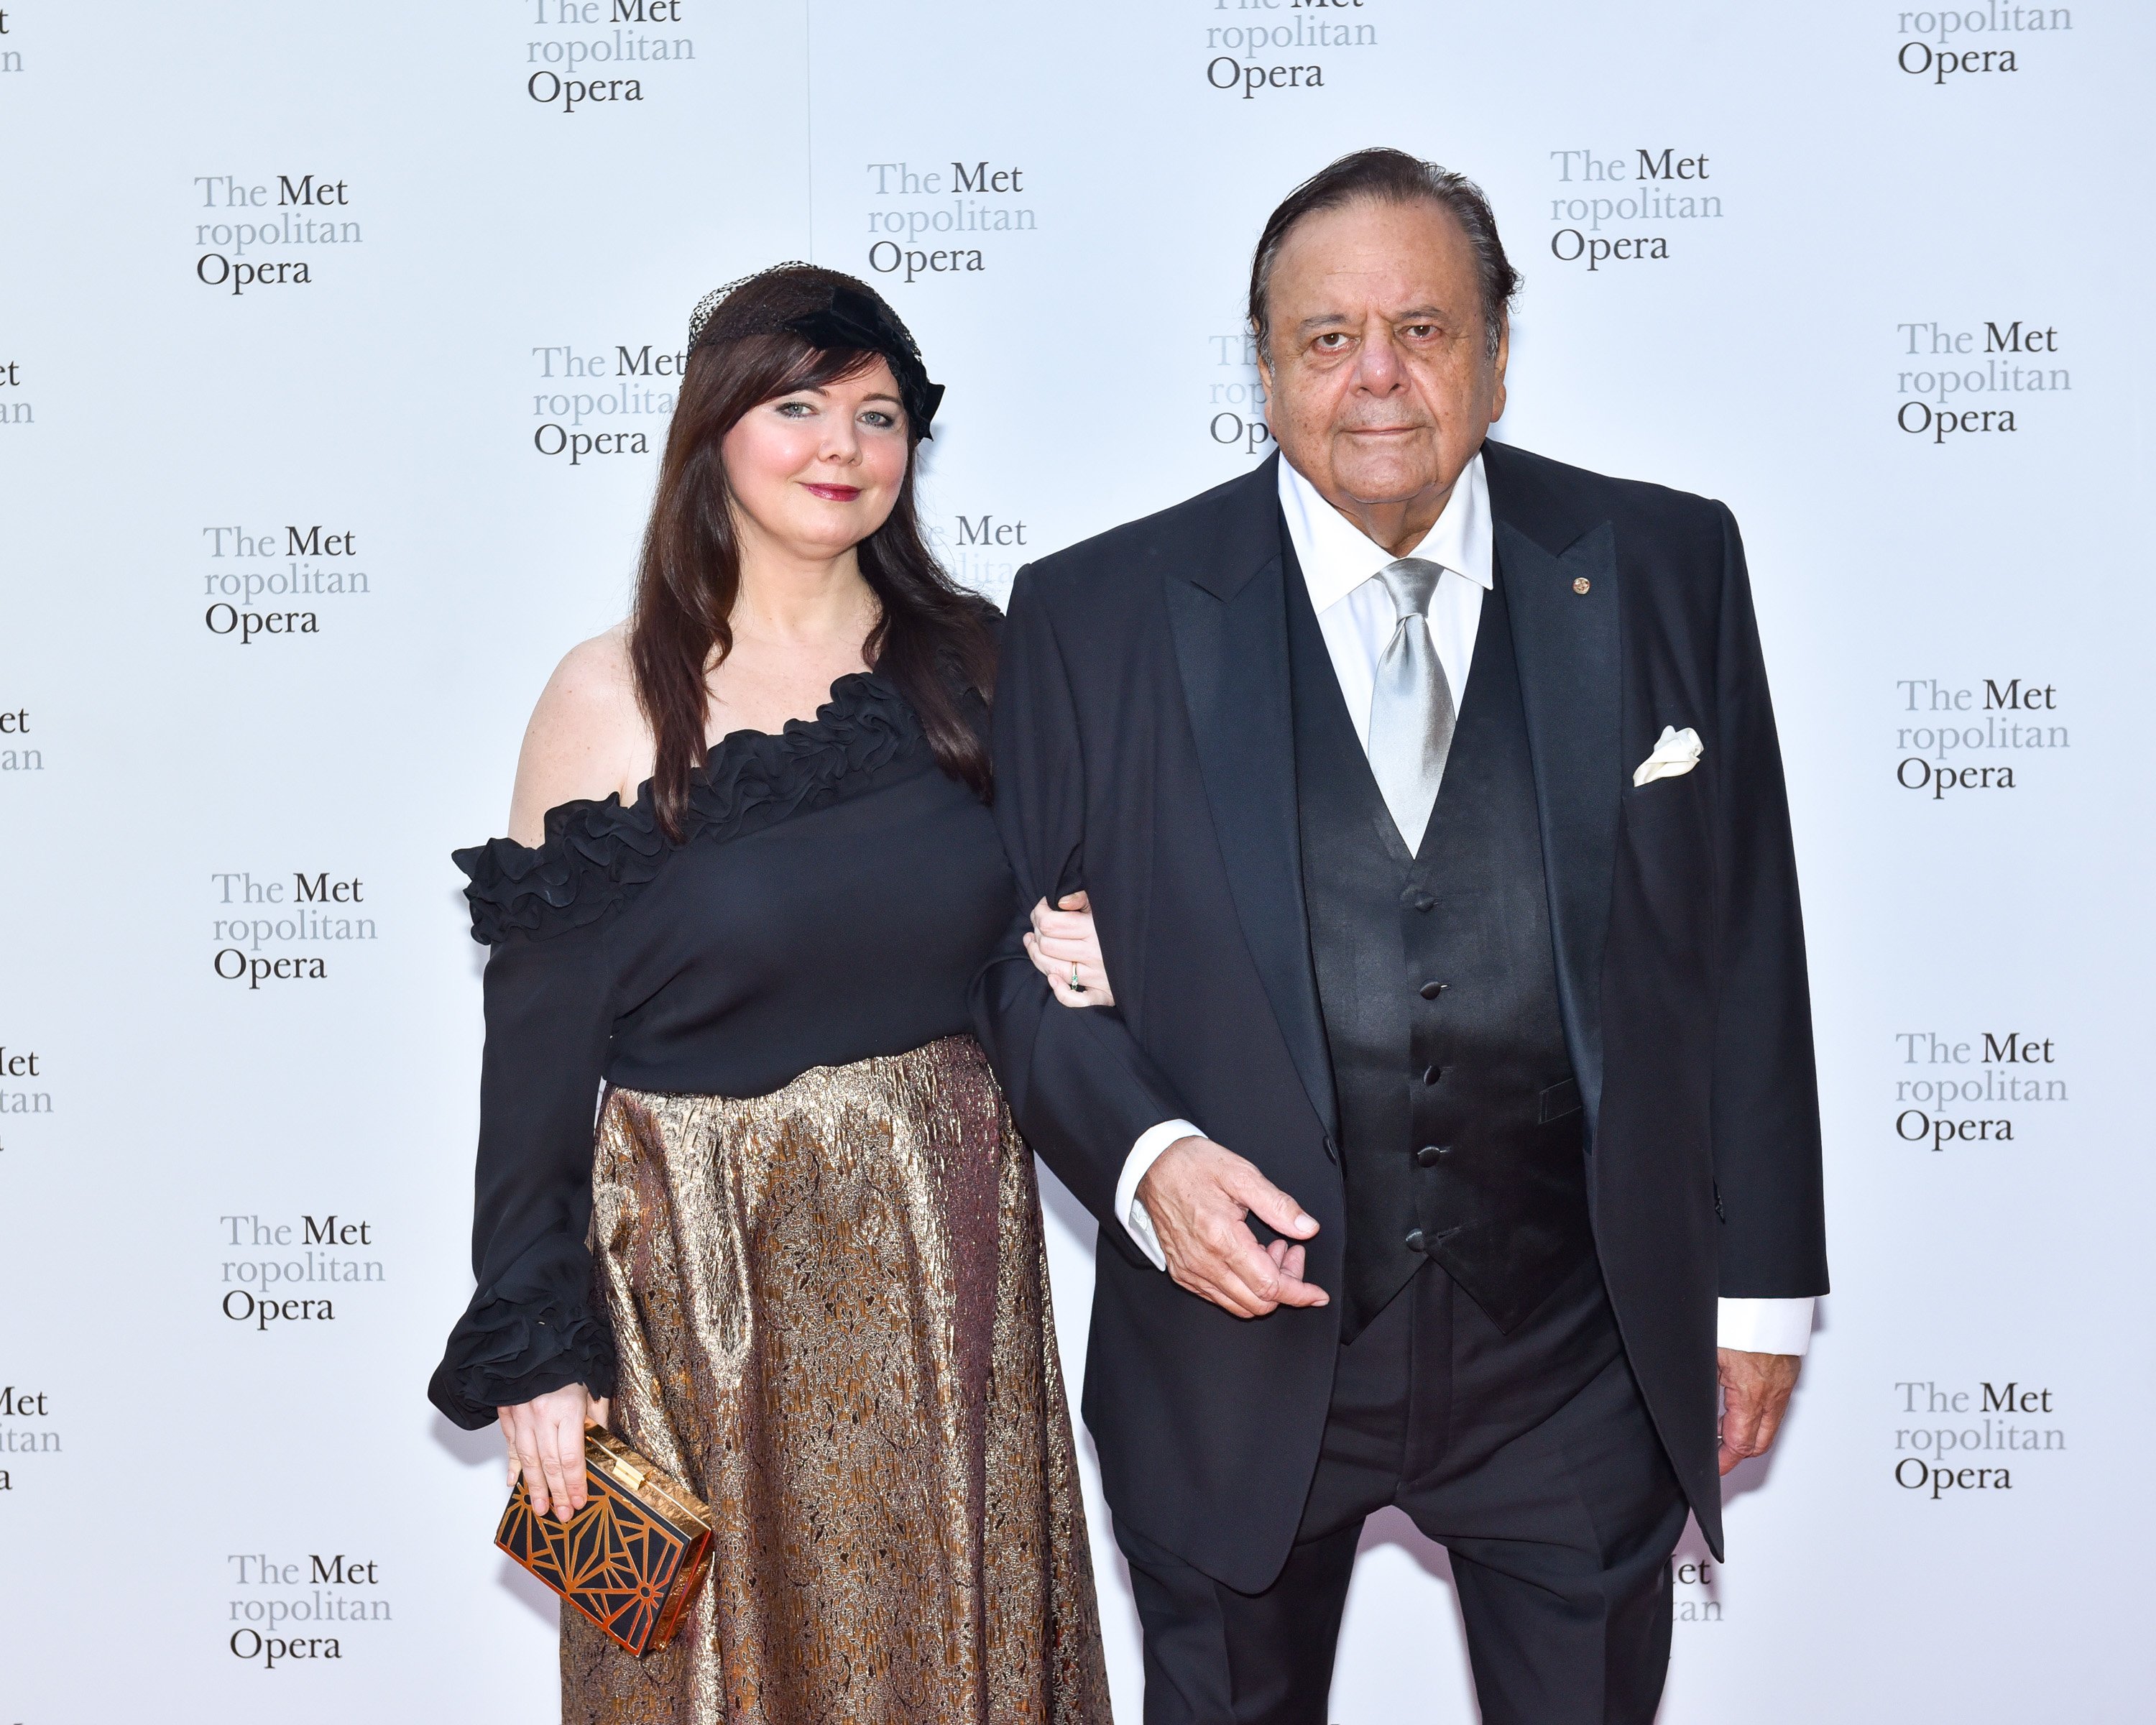 Paul and Dee Dee Sorvino attend attend The Metropolitan Opera Opening Night Gala: Saint-Saens' "Samson et Dalila" at Lincoln Center. September 24, 2018 in New York City. | Source: Getty Images 